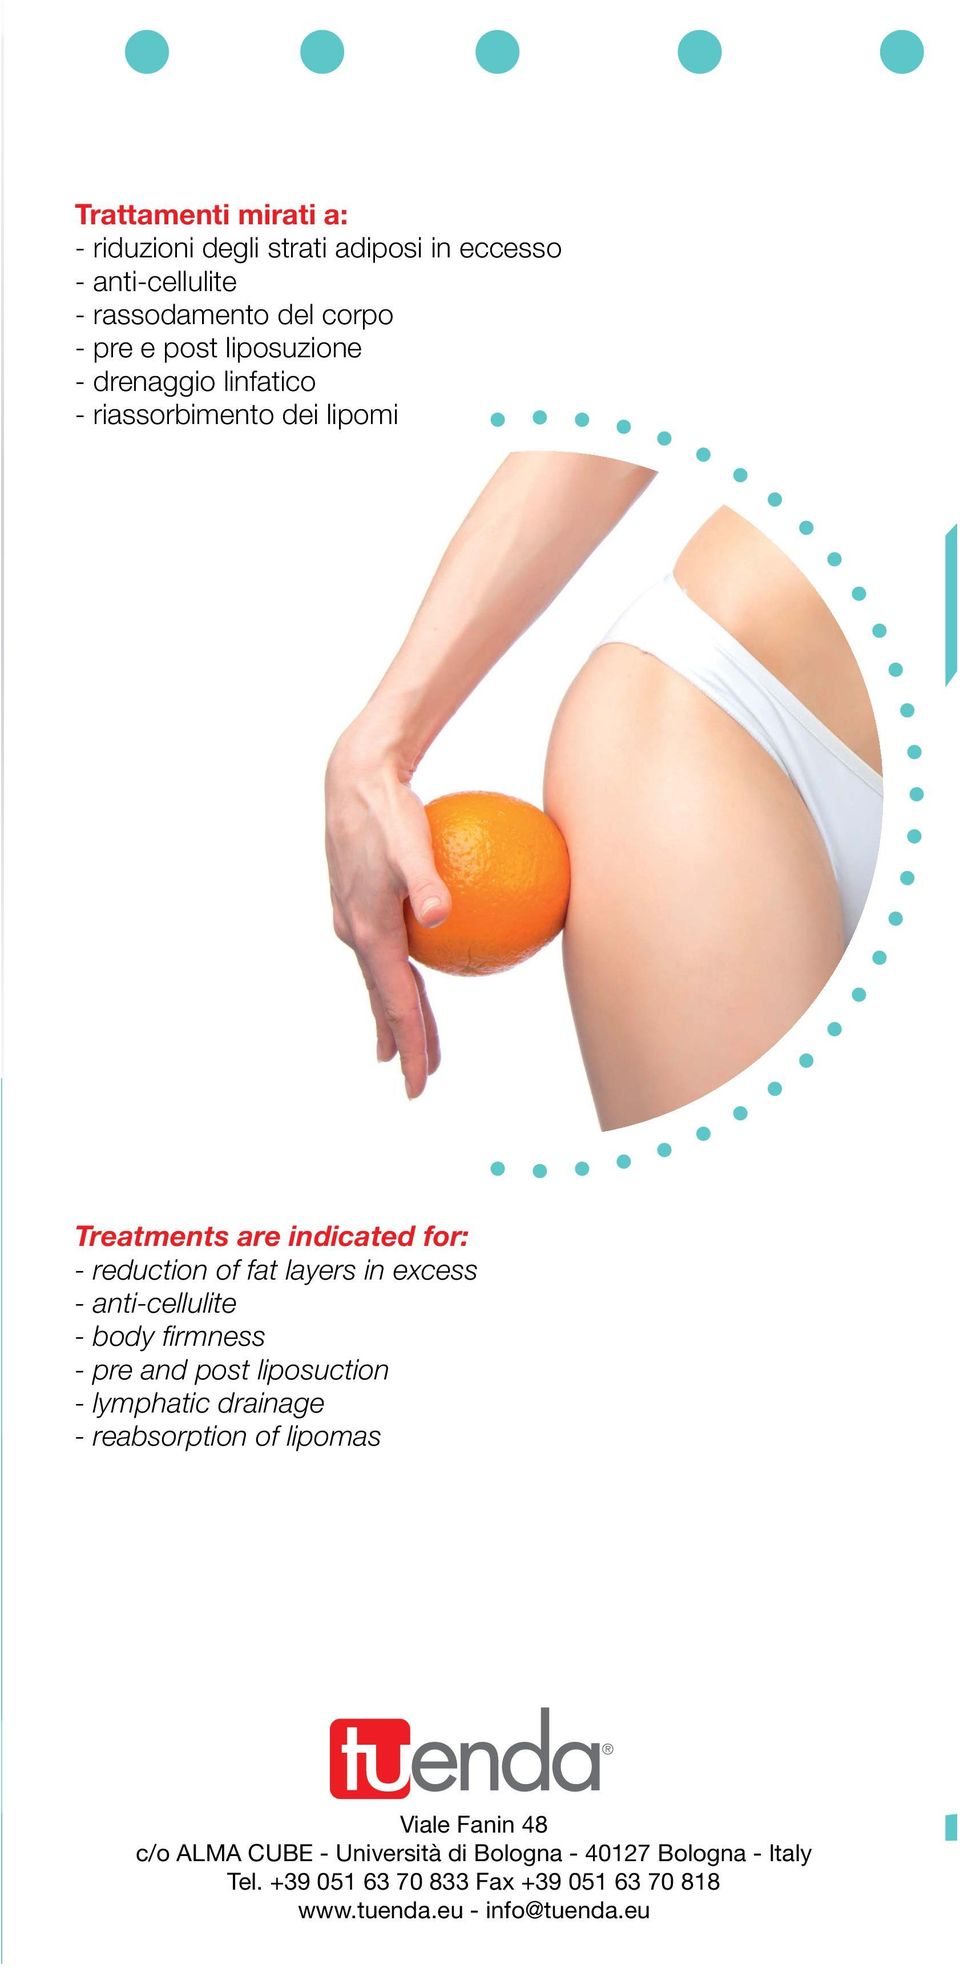 excess - anti-cellulite - body firmness - pre and post liposuction - lymphatic drainage - reabsorption of lipomas Viale Fanin